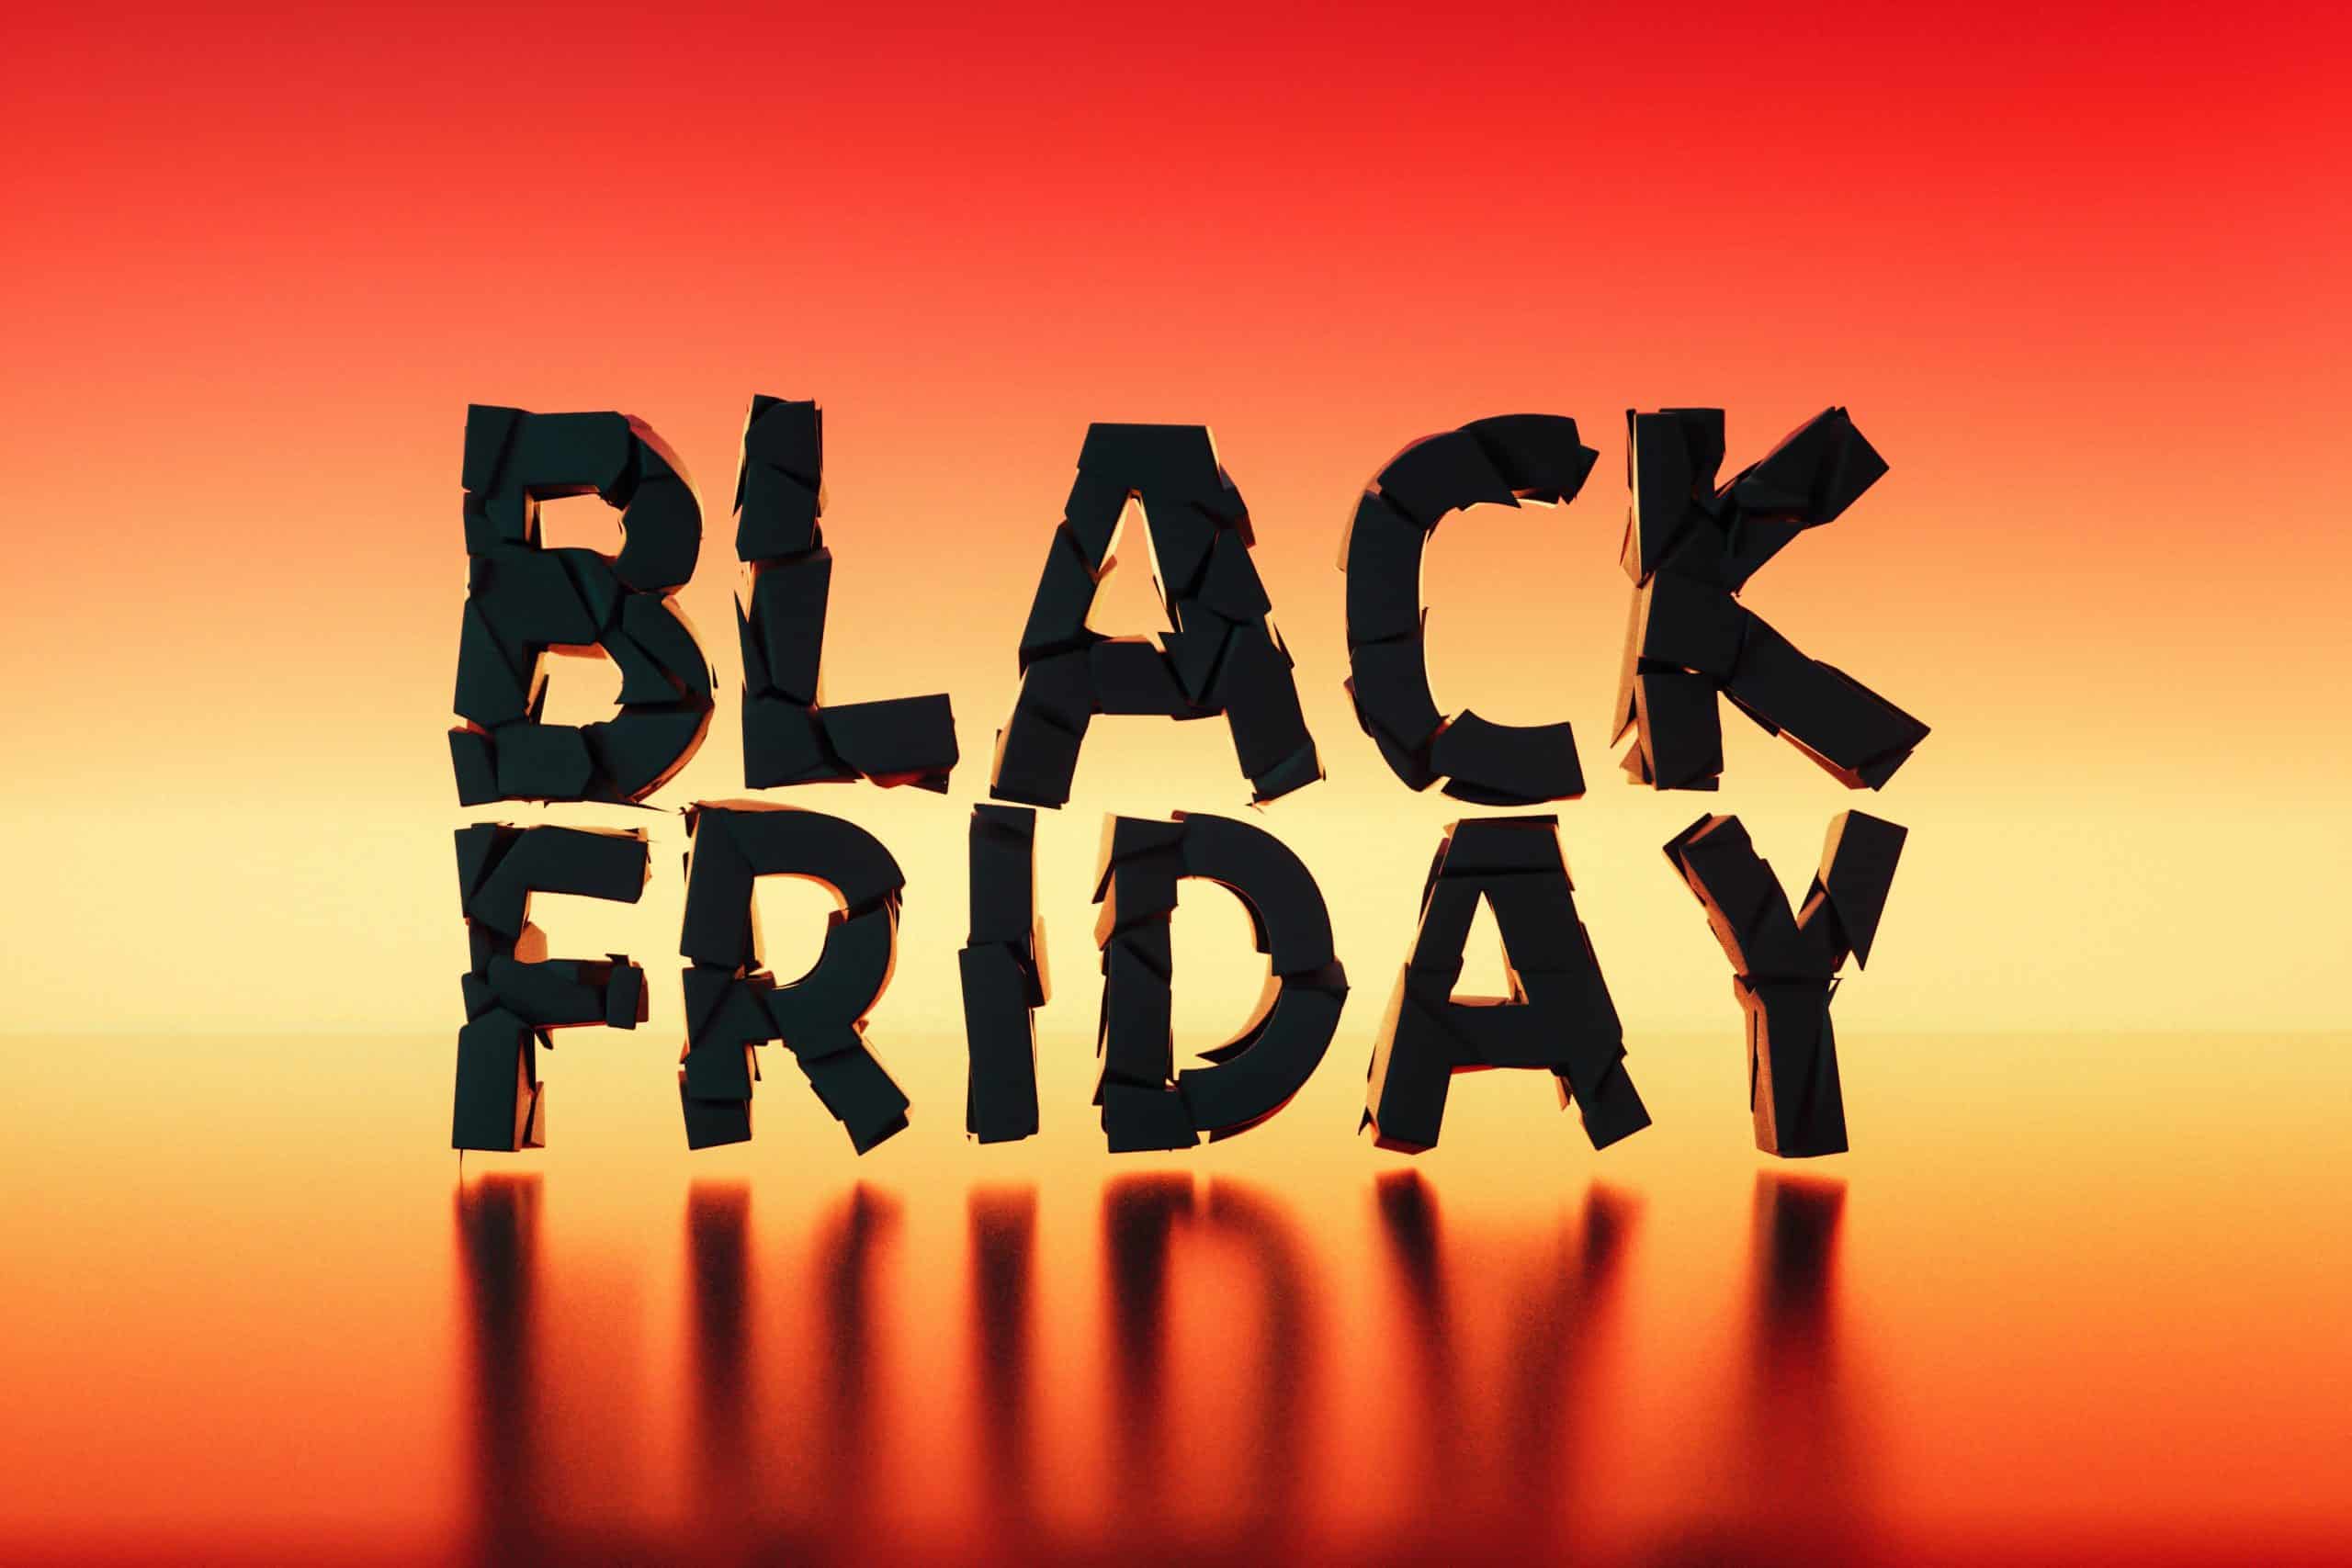 The 55+ best  Black Friday deals 2023